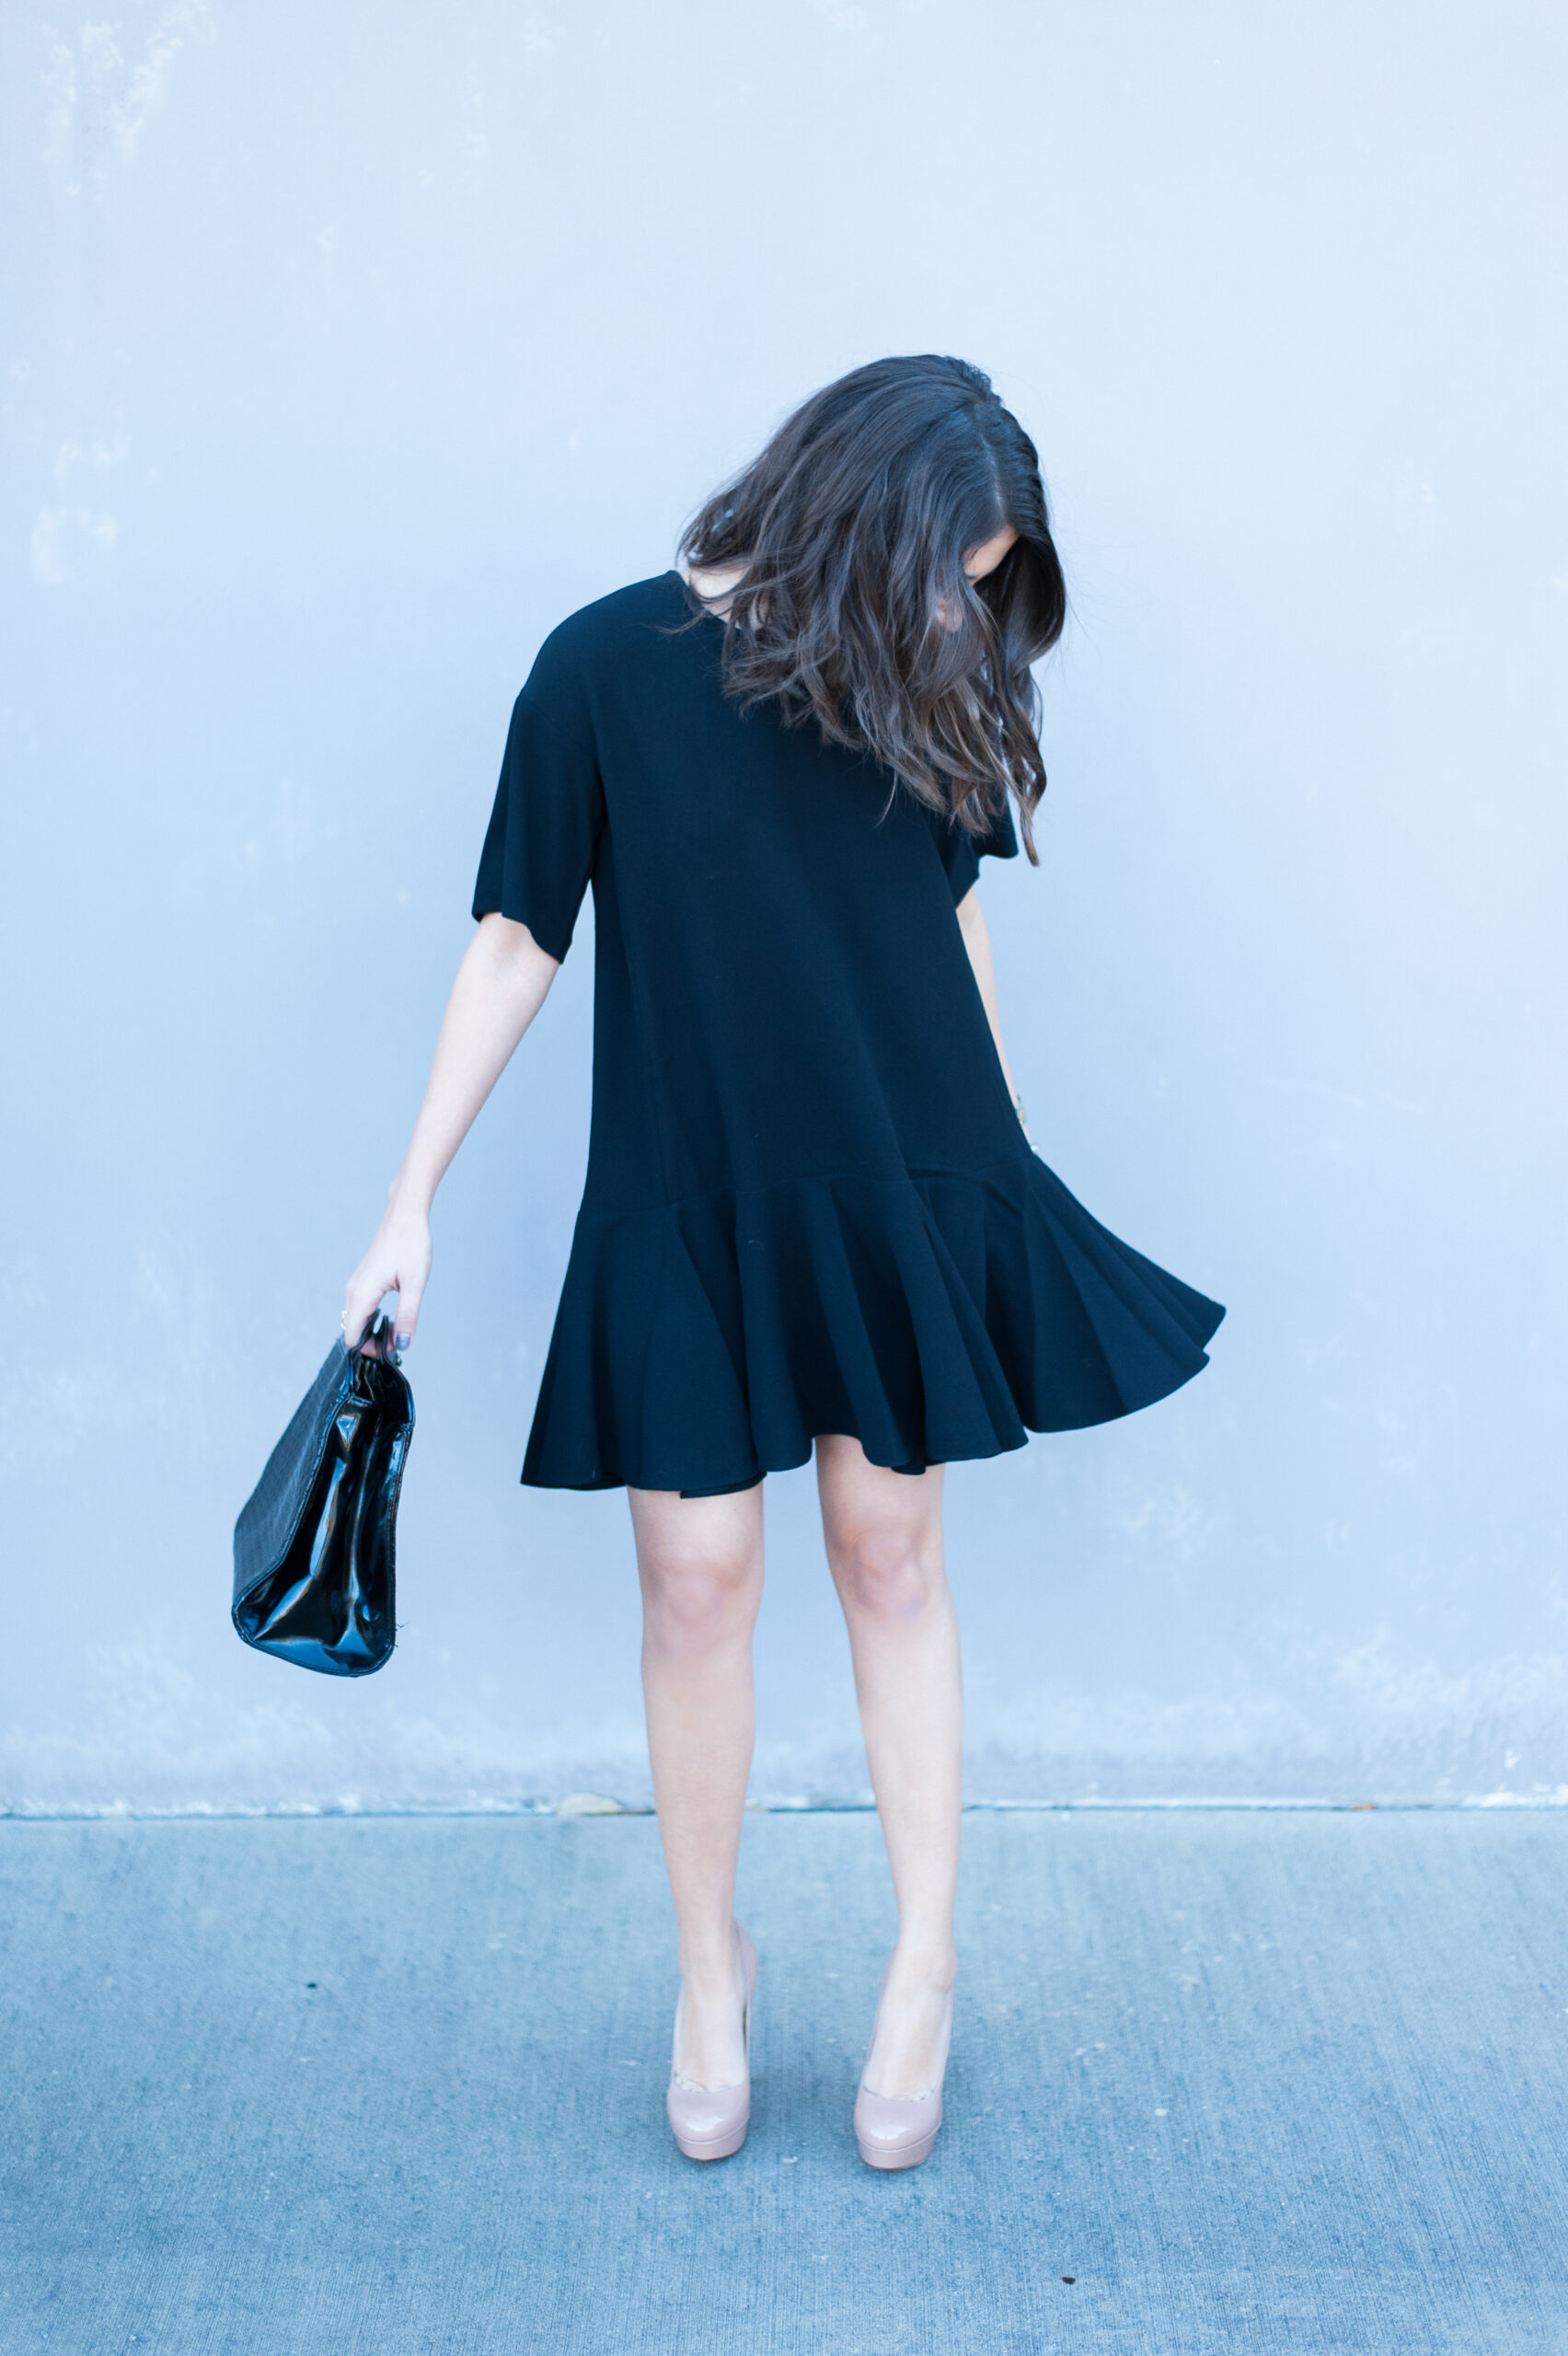 Dress Up Buttercup | Houston Fashion Blog - Dede Raad | French Connection Drop Waist Knit Dress